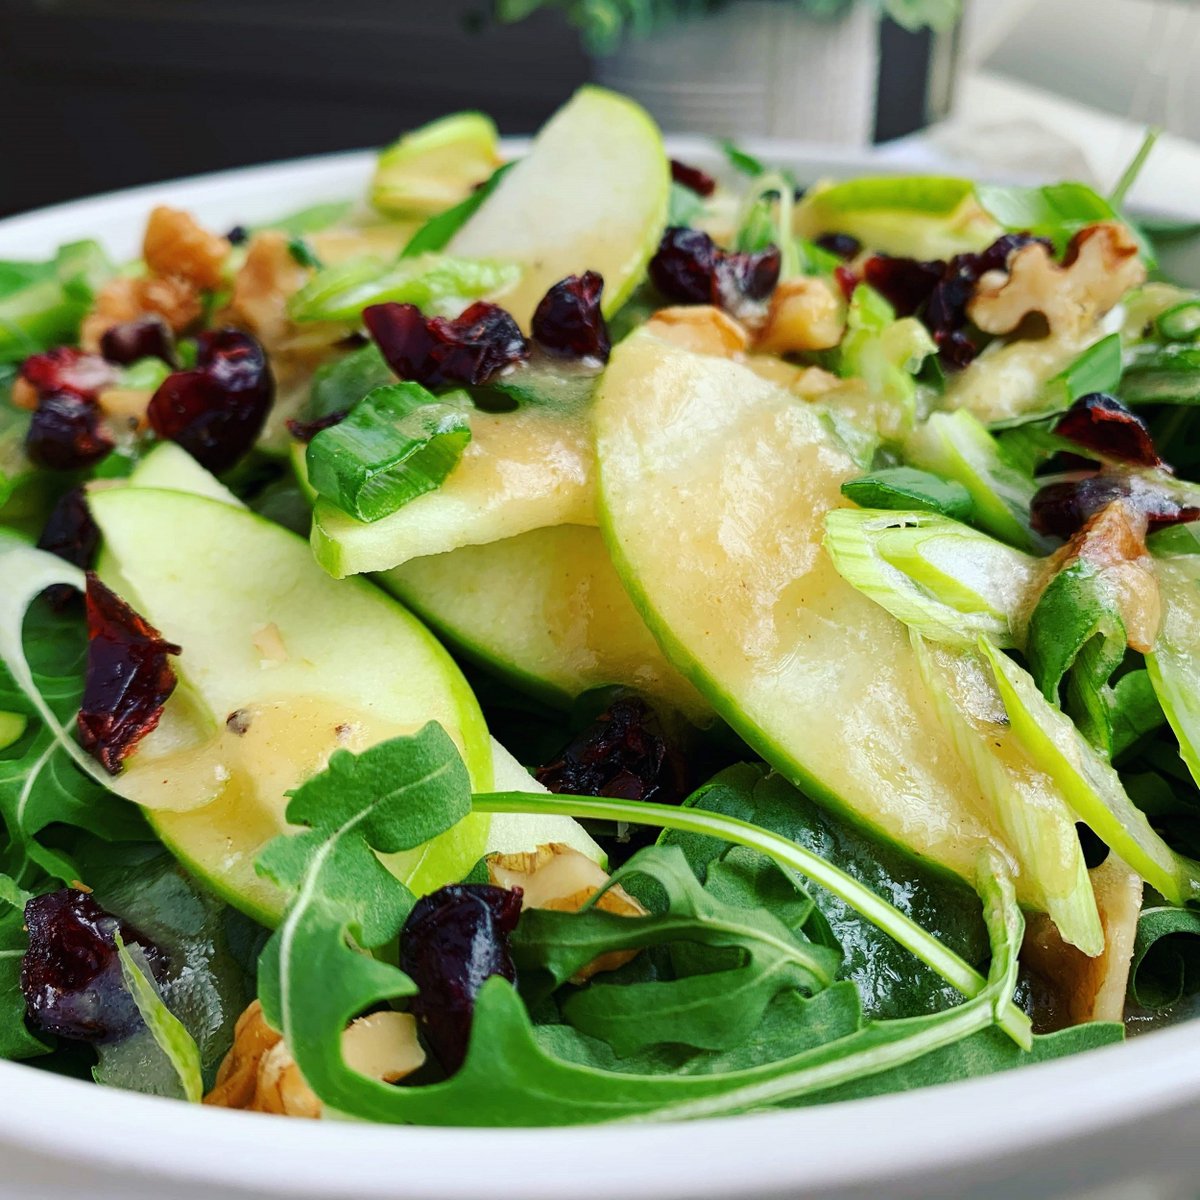 Sooo. FRESH! Spinach layered with tart green apple, peppery celery and arugula, crunchy walnuts, and sweet cranberries. And the quickest apple vinaigrette you'll ever make!  
ow.ly/inpt50yDguB
#salads #springmeals #easymeals #veganmeals #healthymeals